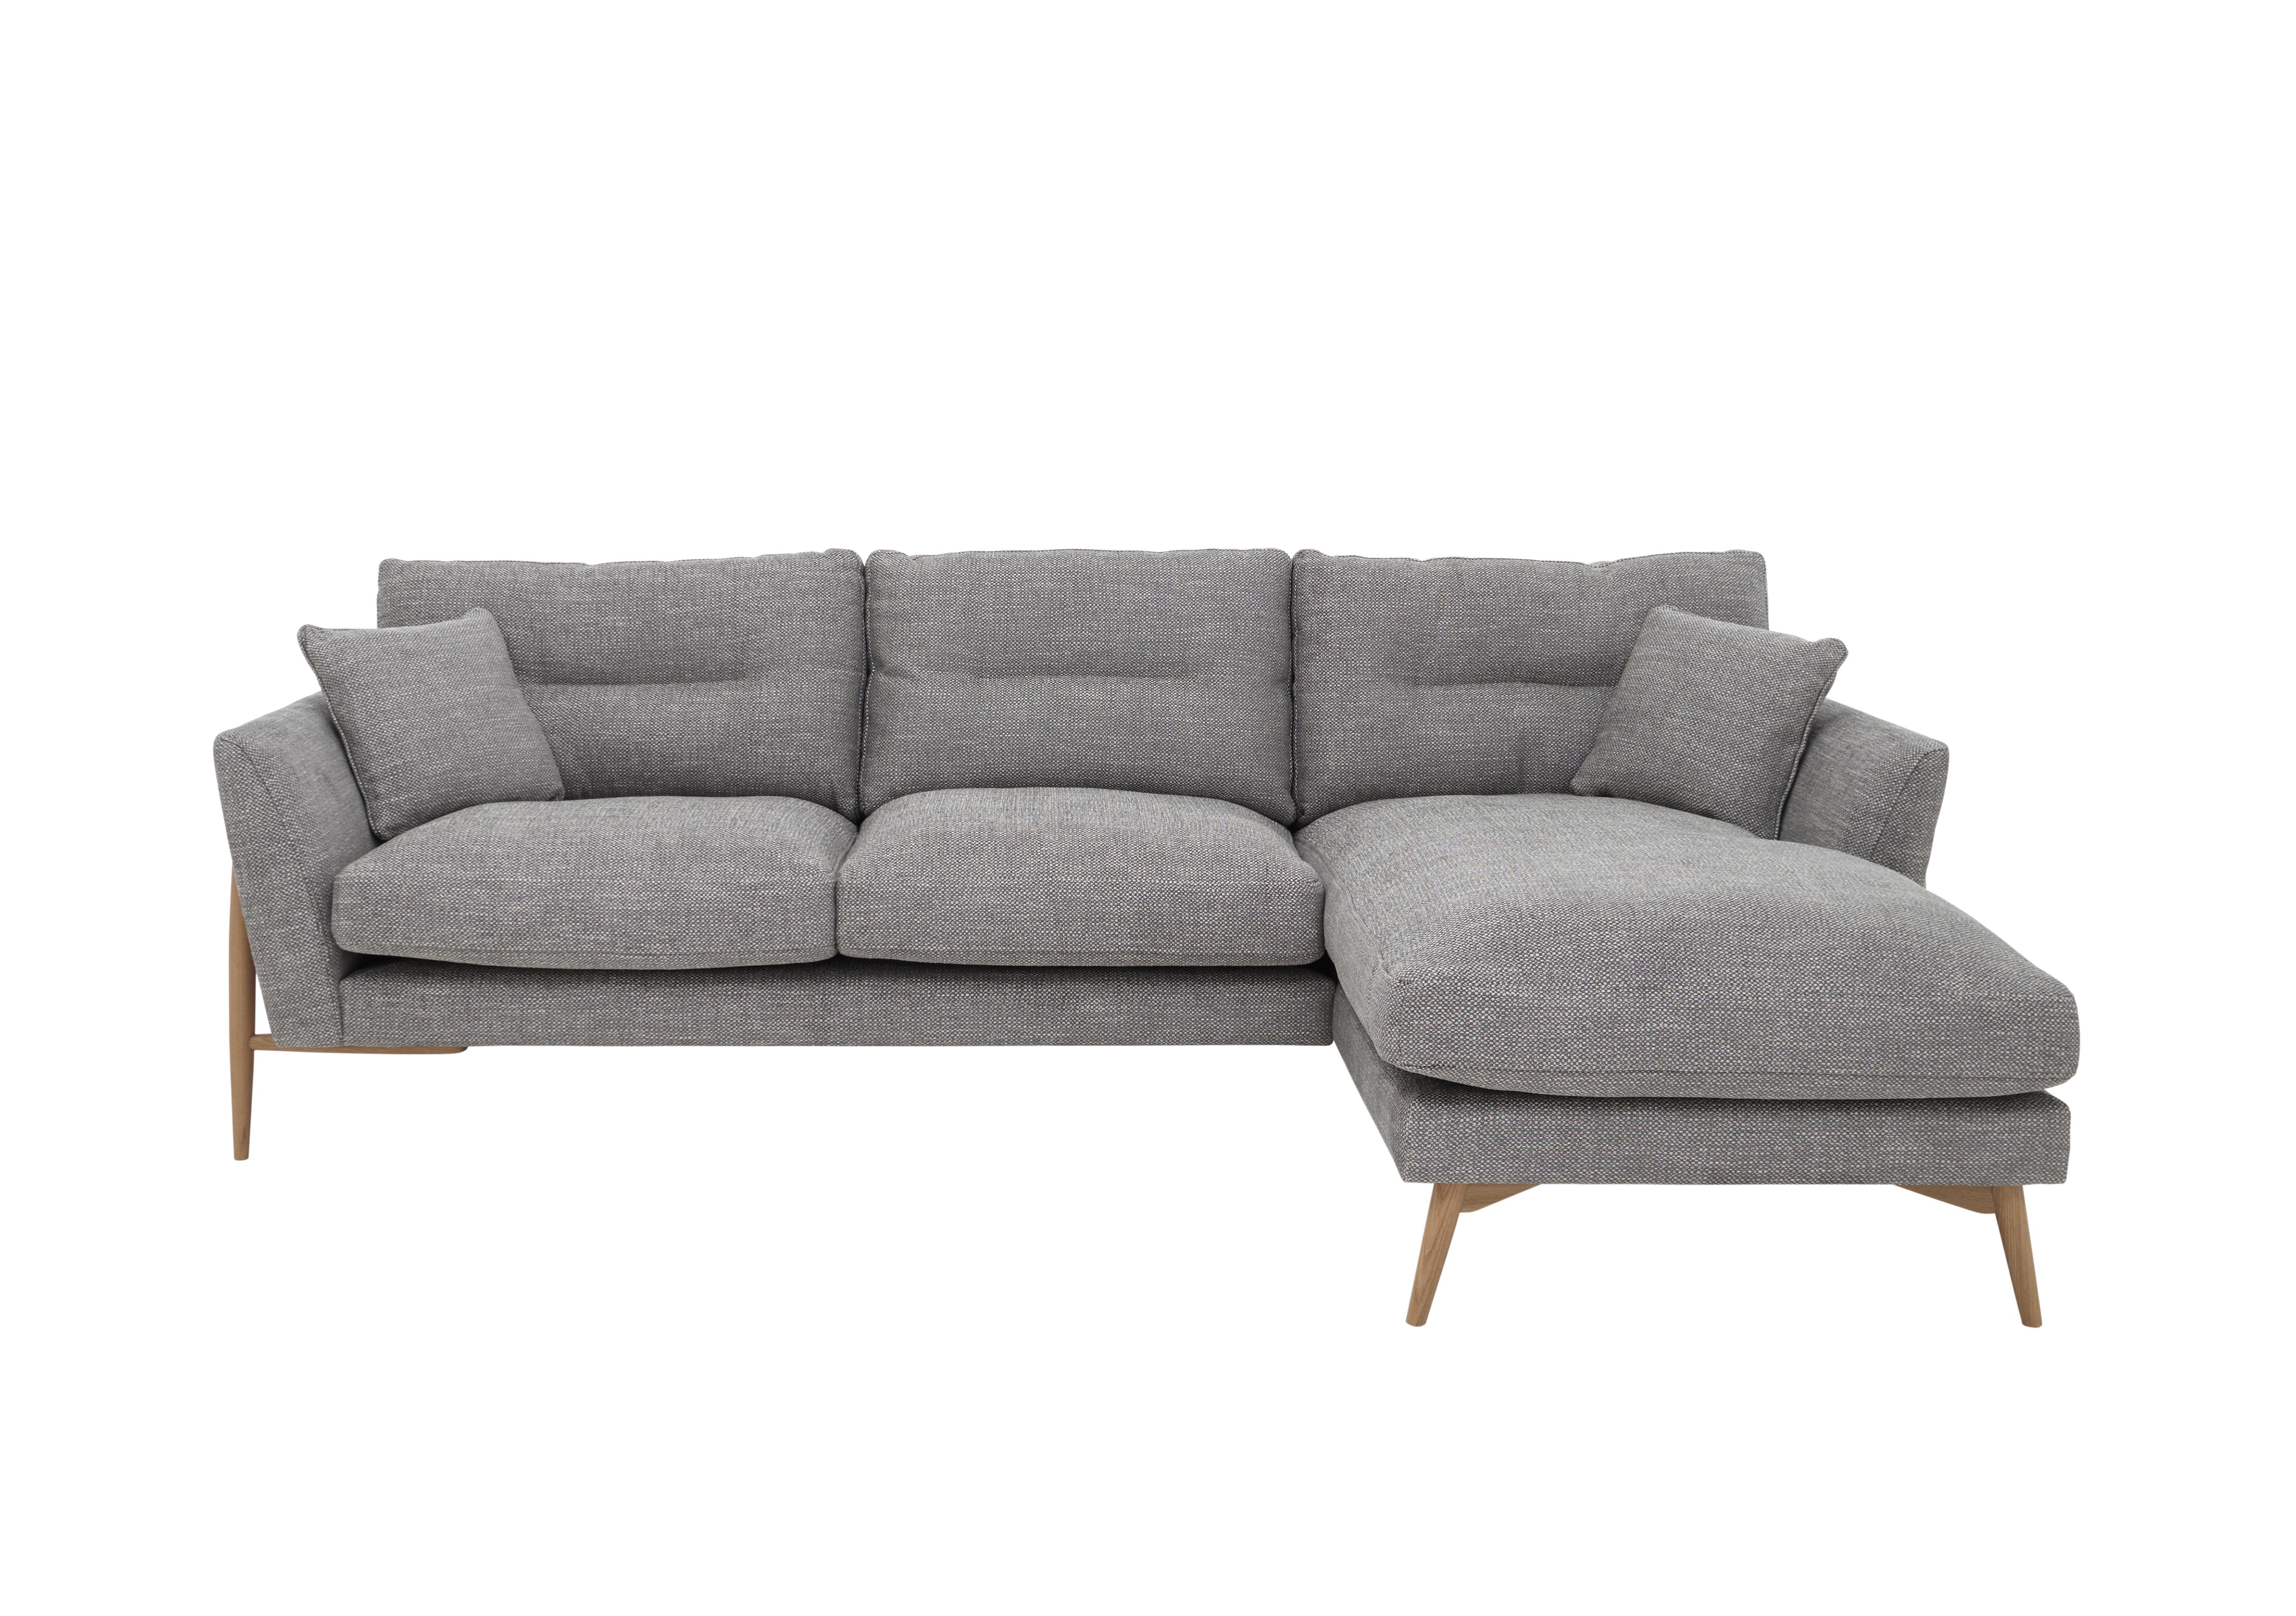 Bellaria Right Hand Facing Chaise Sofa in T281 Cm Legs on Furniture Village